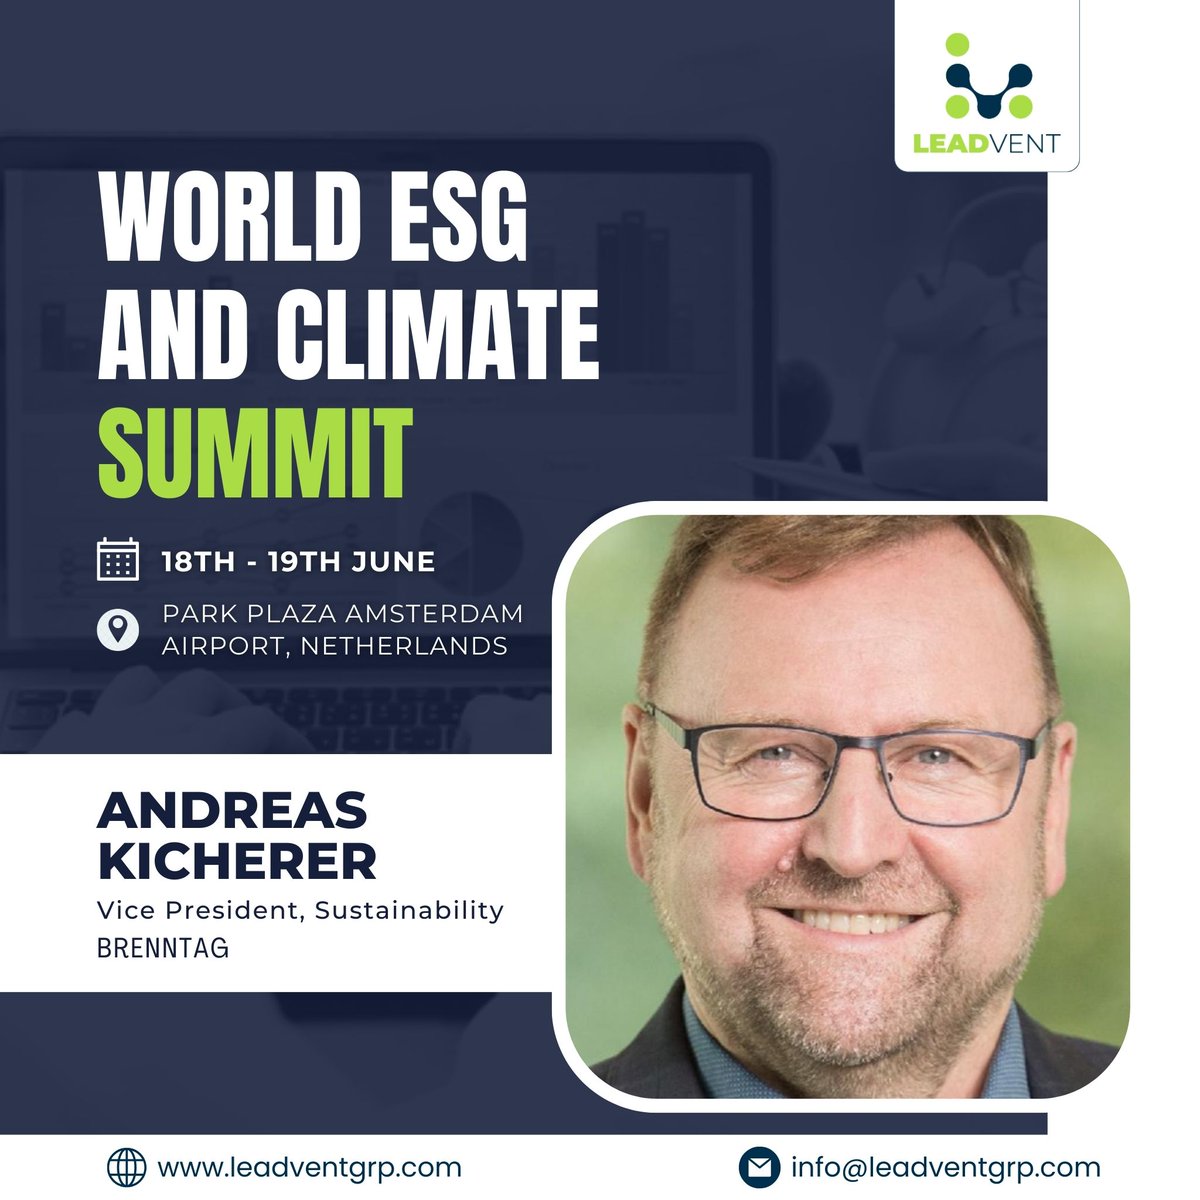 Excited to introduce Andreas Kicherer. He is the Vice President of Sustainability at Brenntag.

Obtain a pass - bit.ly/3QaaYU7

#sustainability #ESGconcerns #NetZero #Renewableenergy #Greenpolicies #Sustainablefuture #Innovation #Climatesolutions #Socialimpact